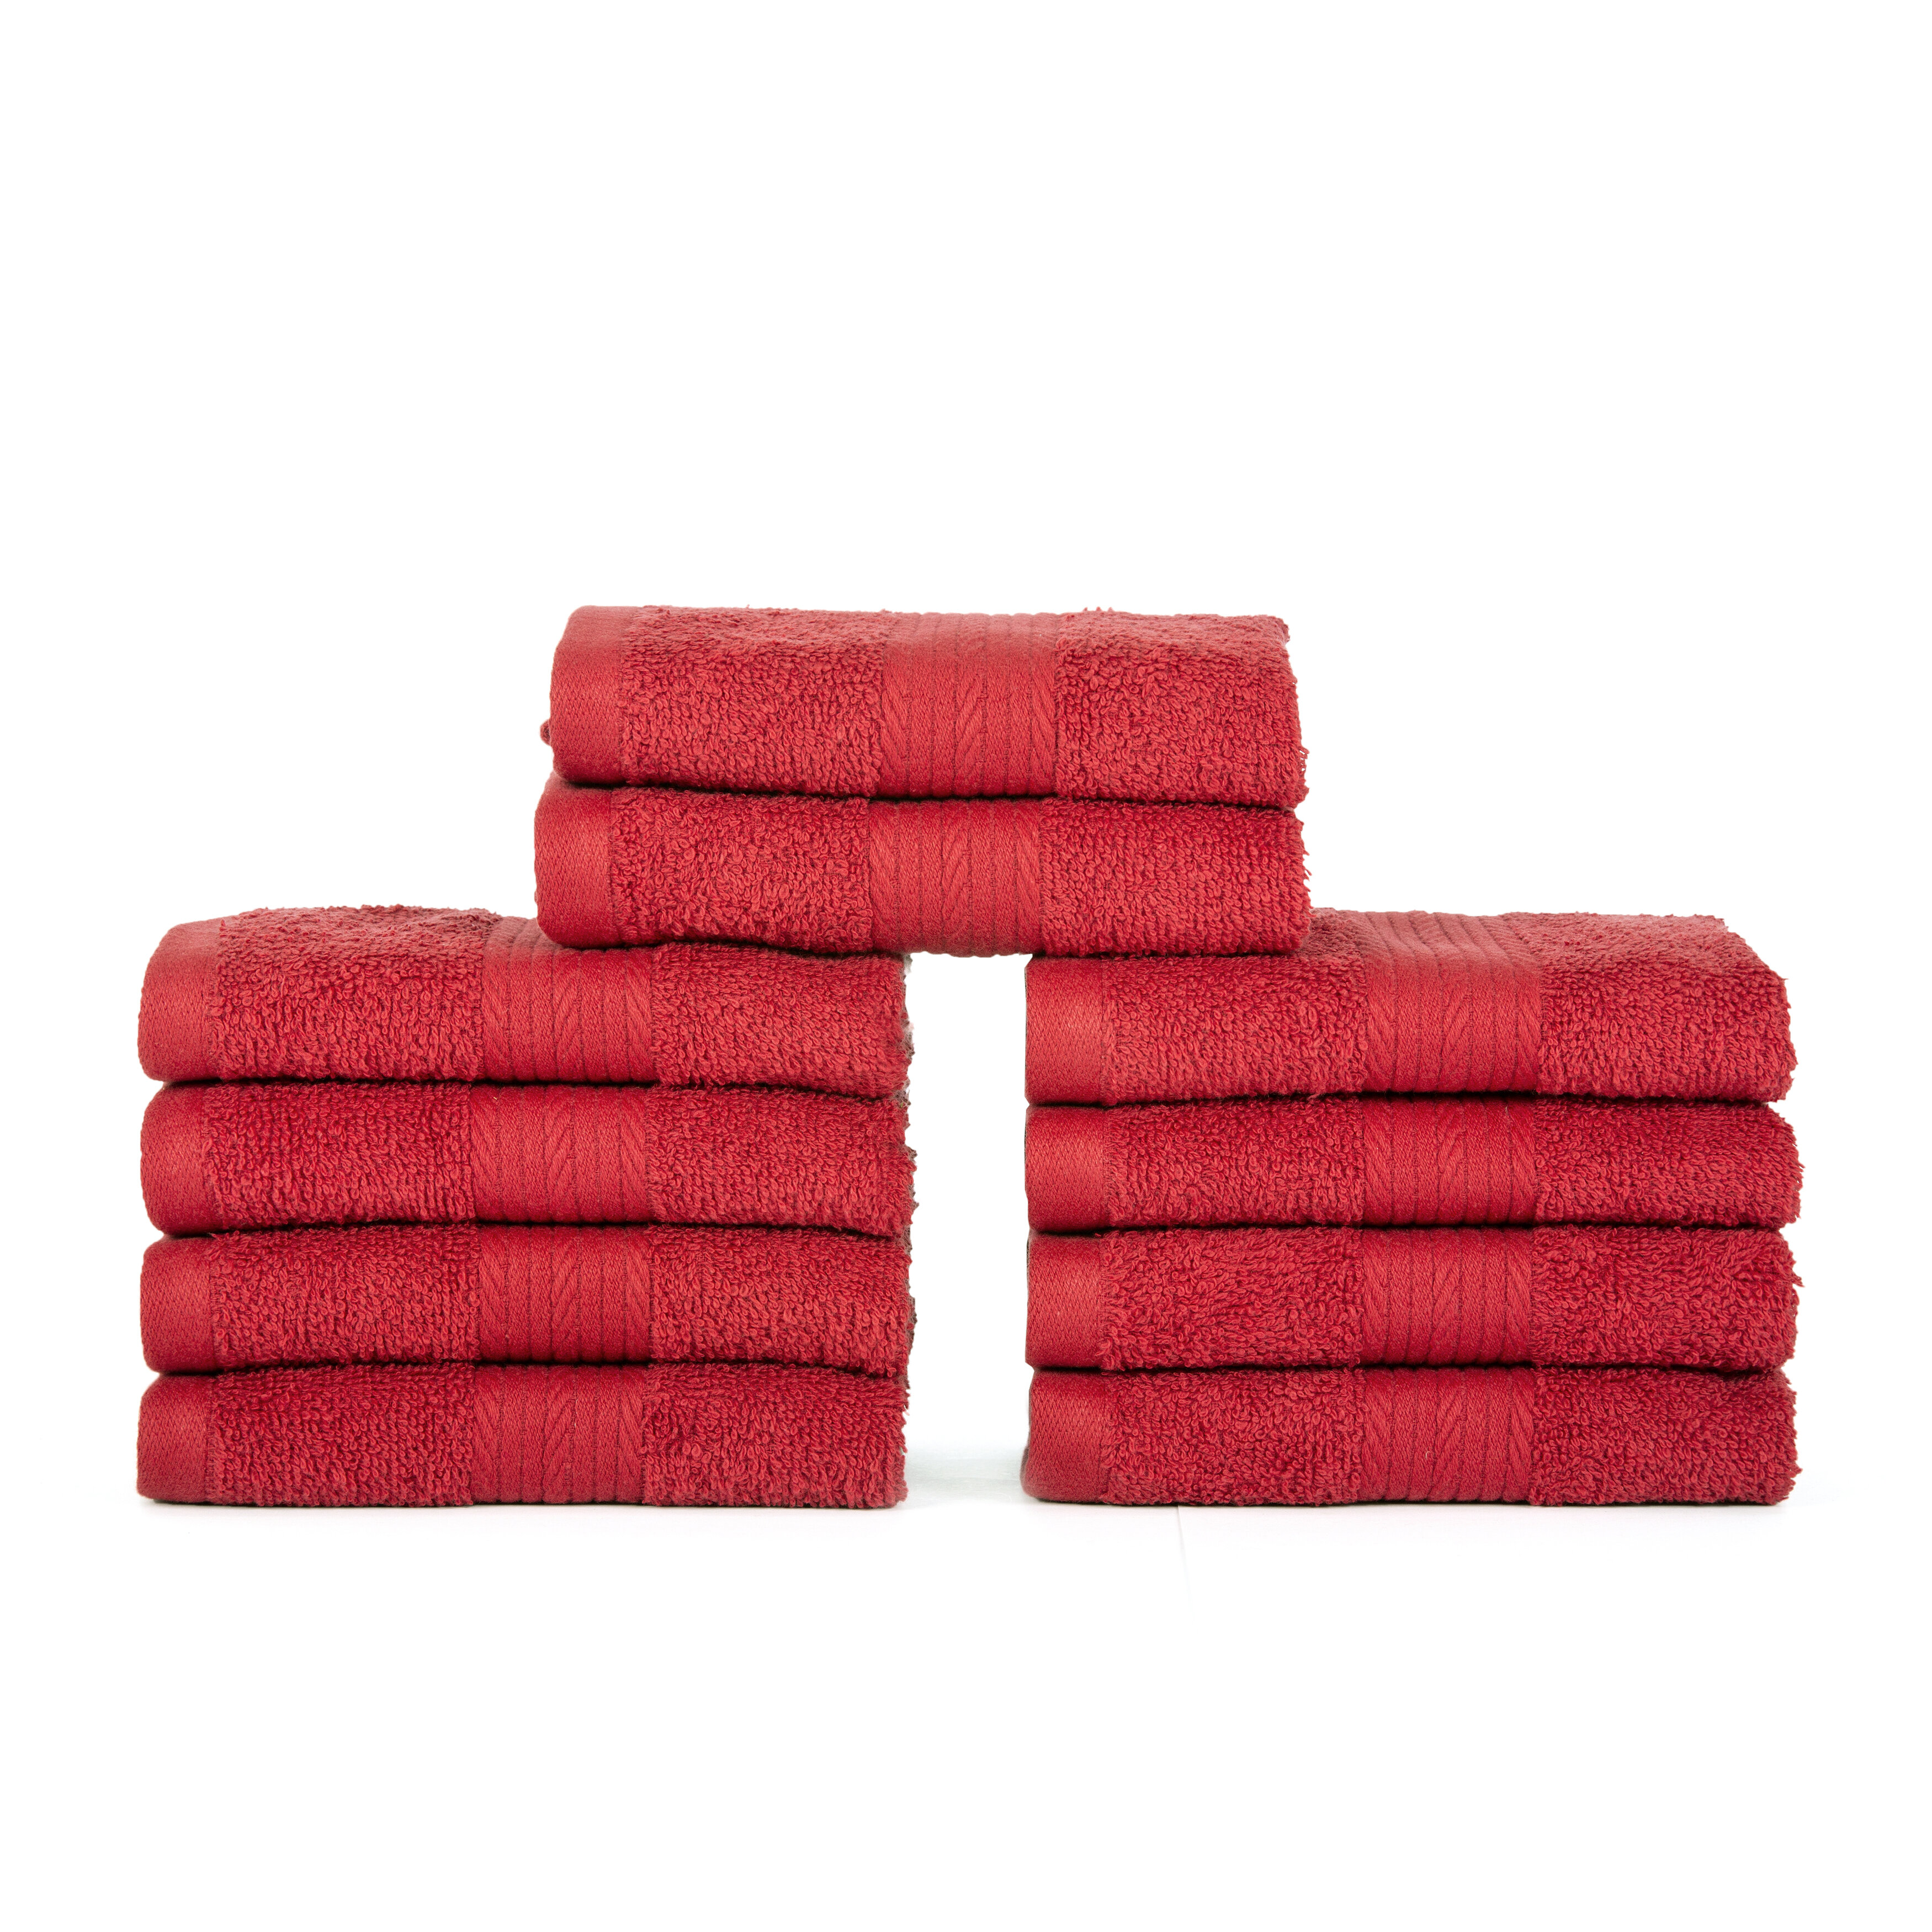 Cariloha Towels Review  : Luxuriate in the Softness of Cariloha Towels!